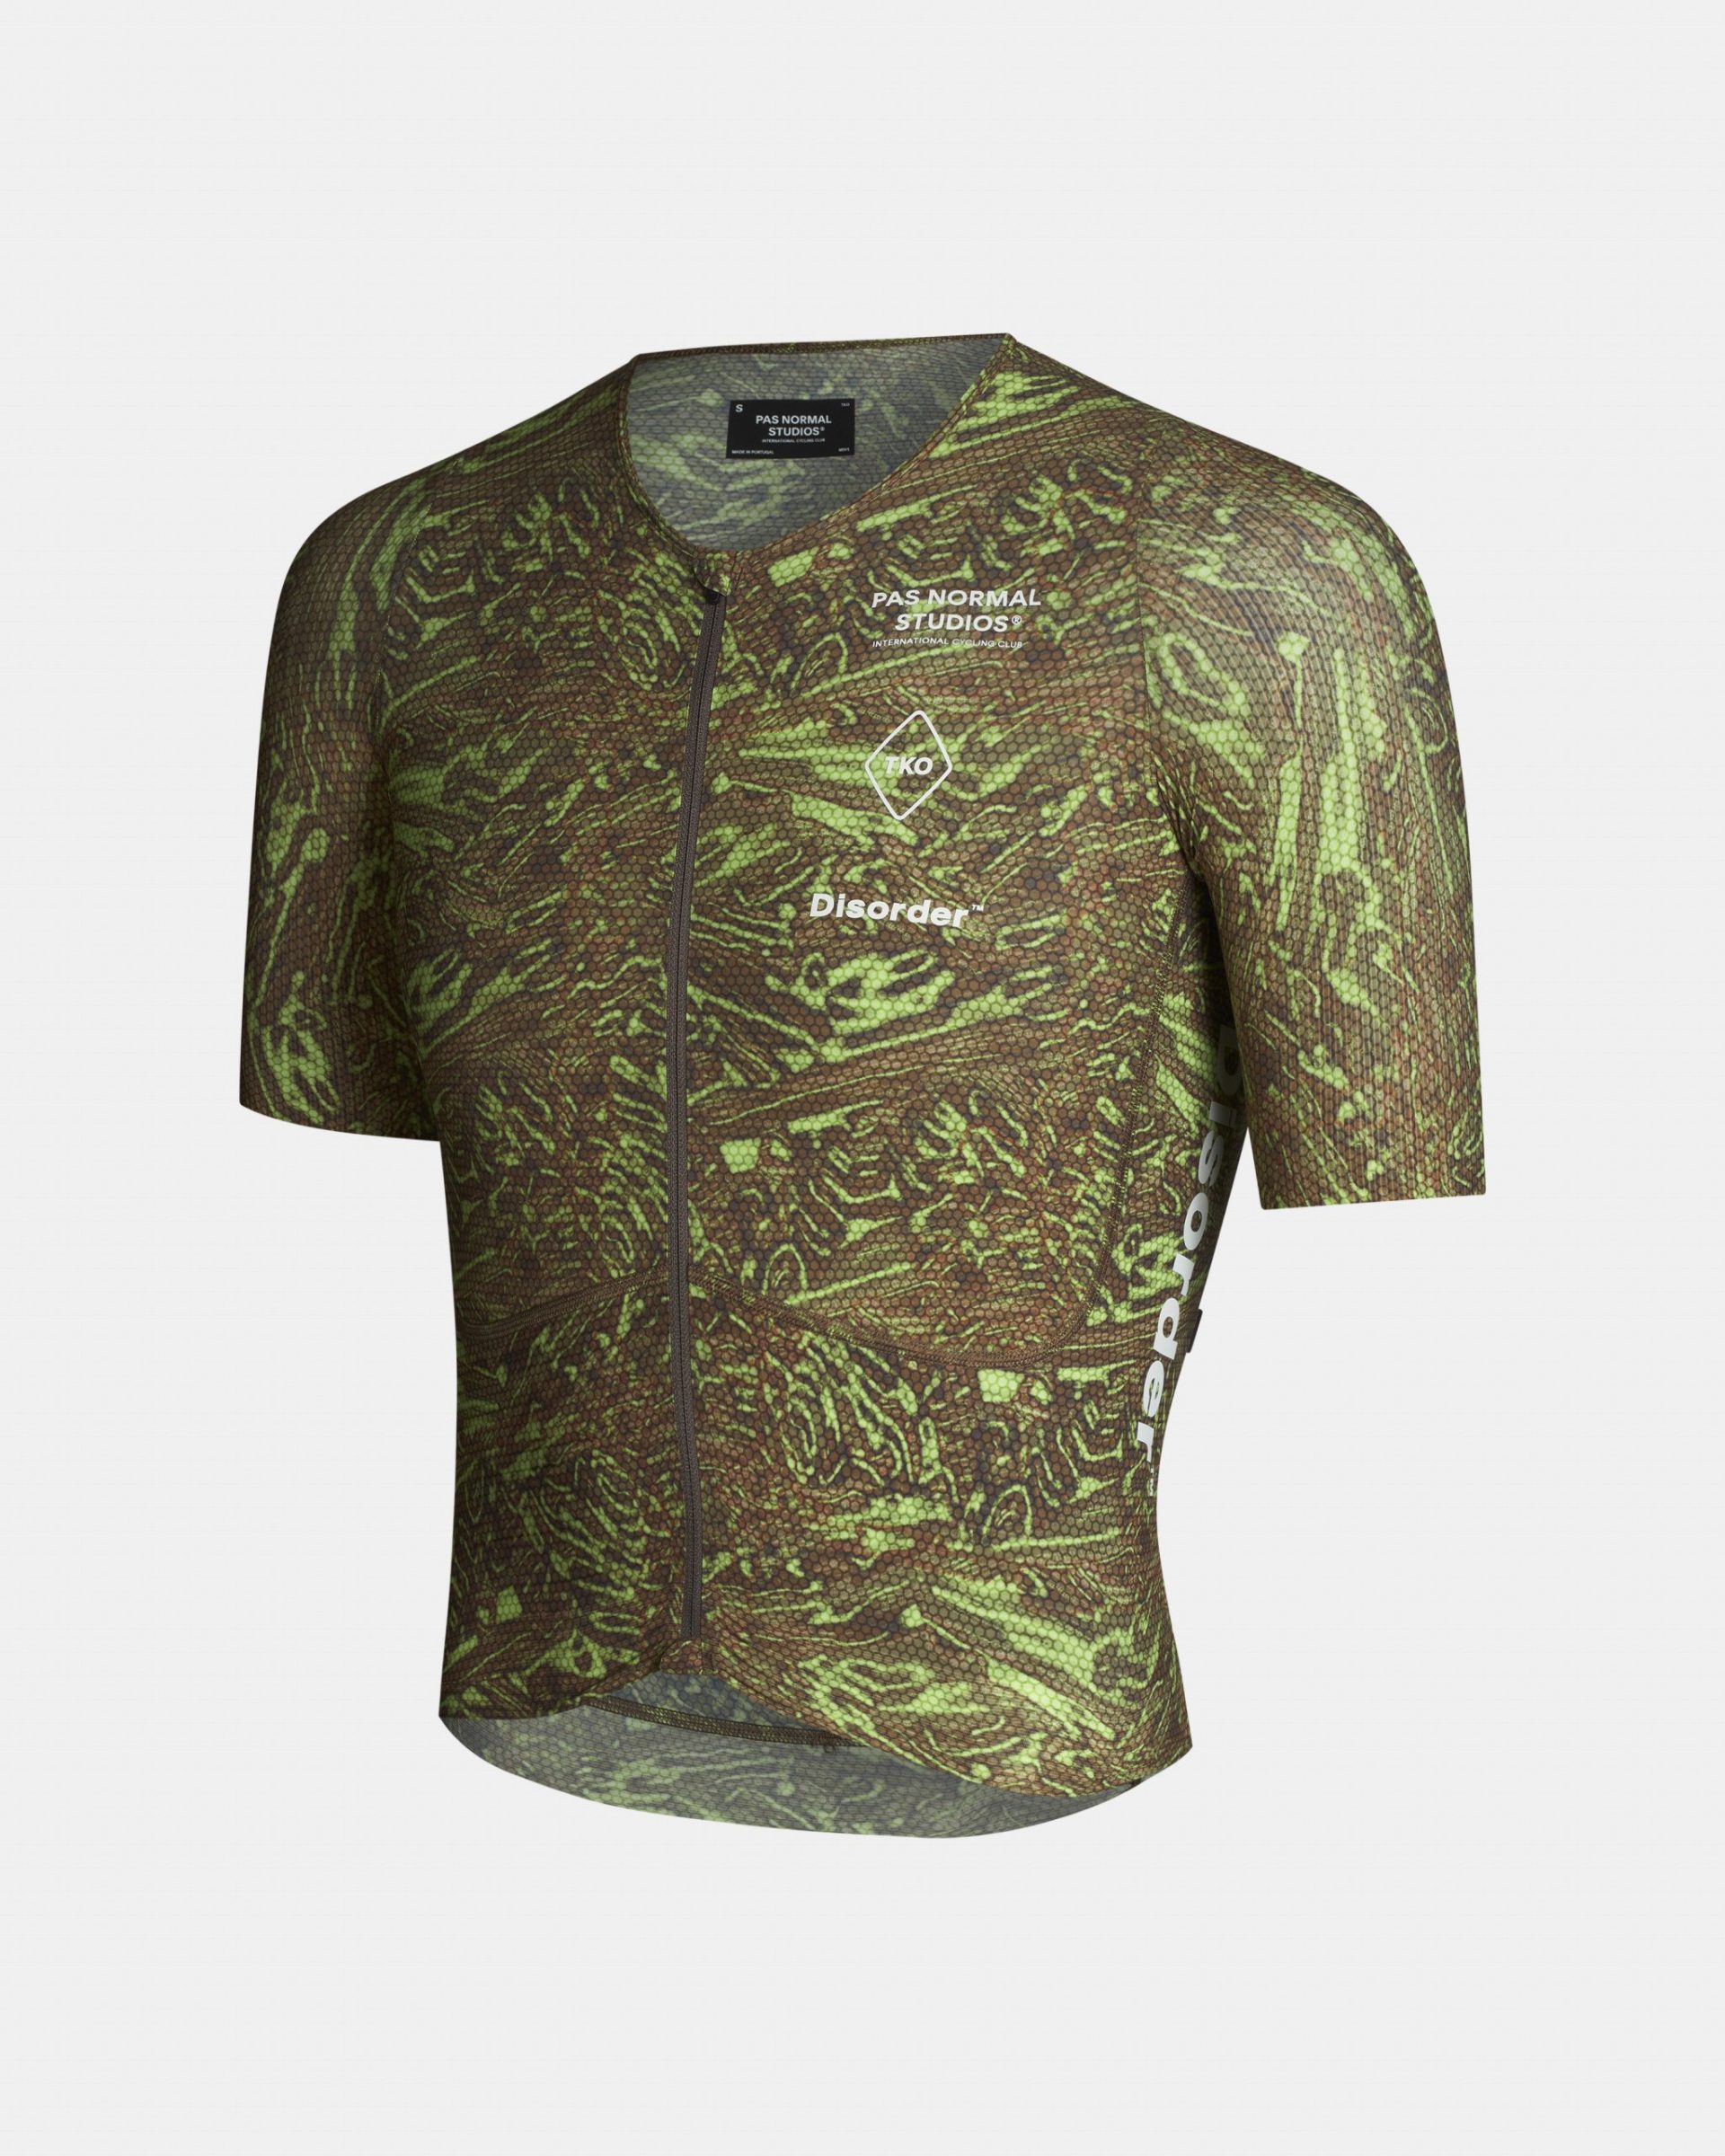 Mens-TKO-Short-Sleeve-Jersey_Green_Side-pdp-page